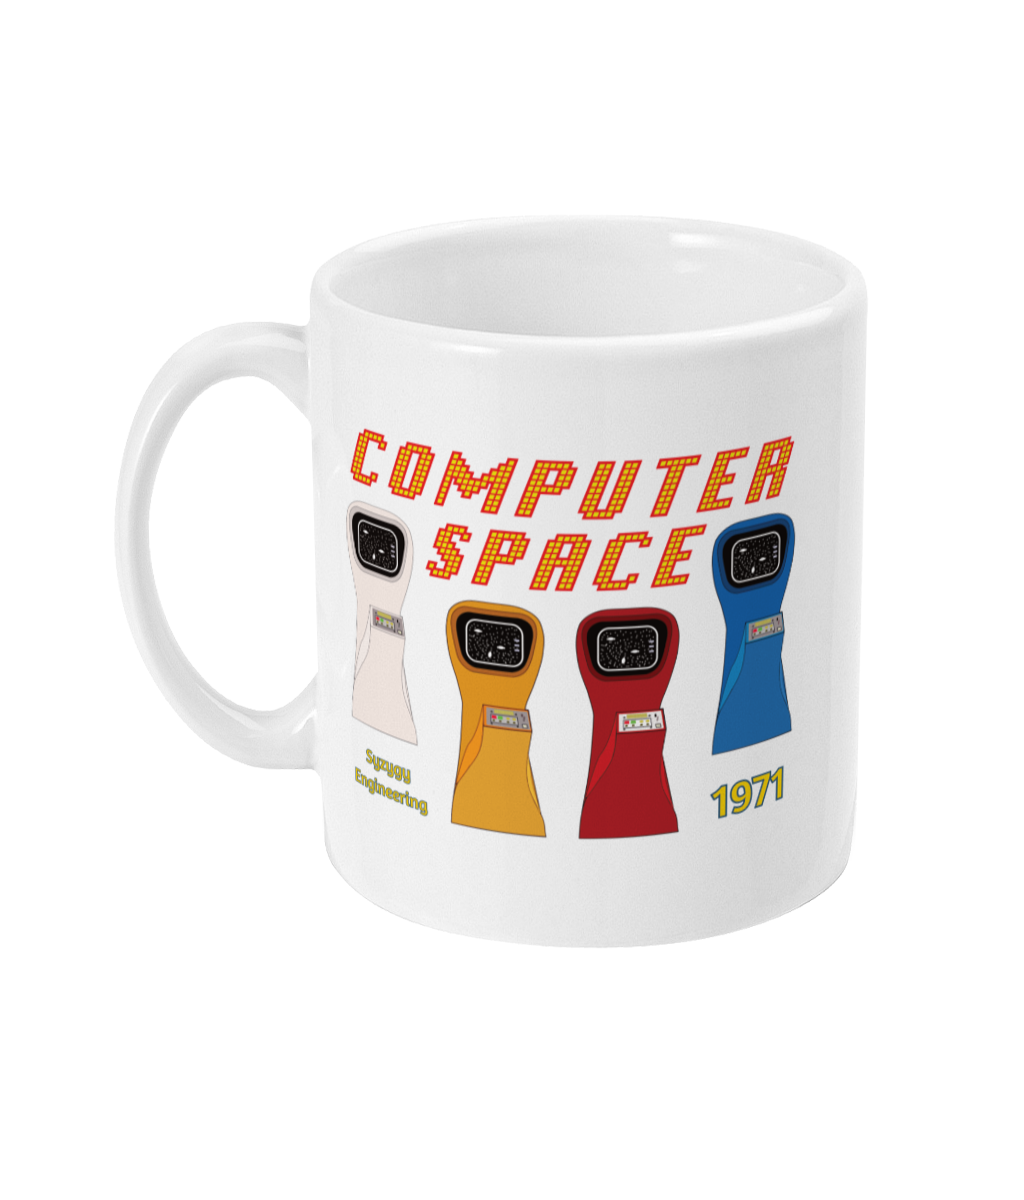 White mug with computer space written and 4 Arcade machines in their iconic colours,white,yellow,red and blue